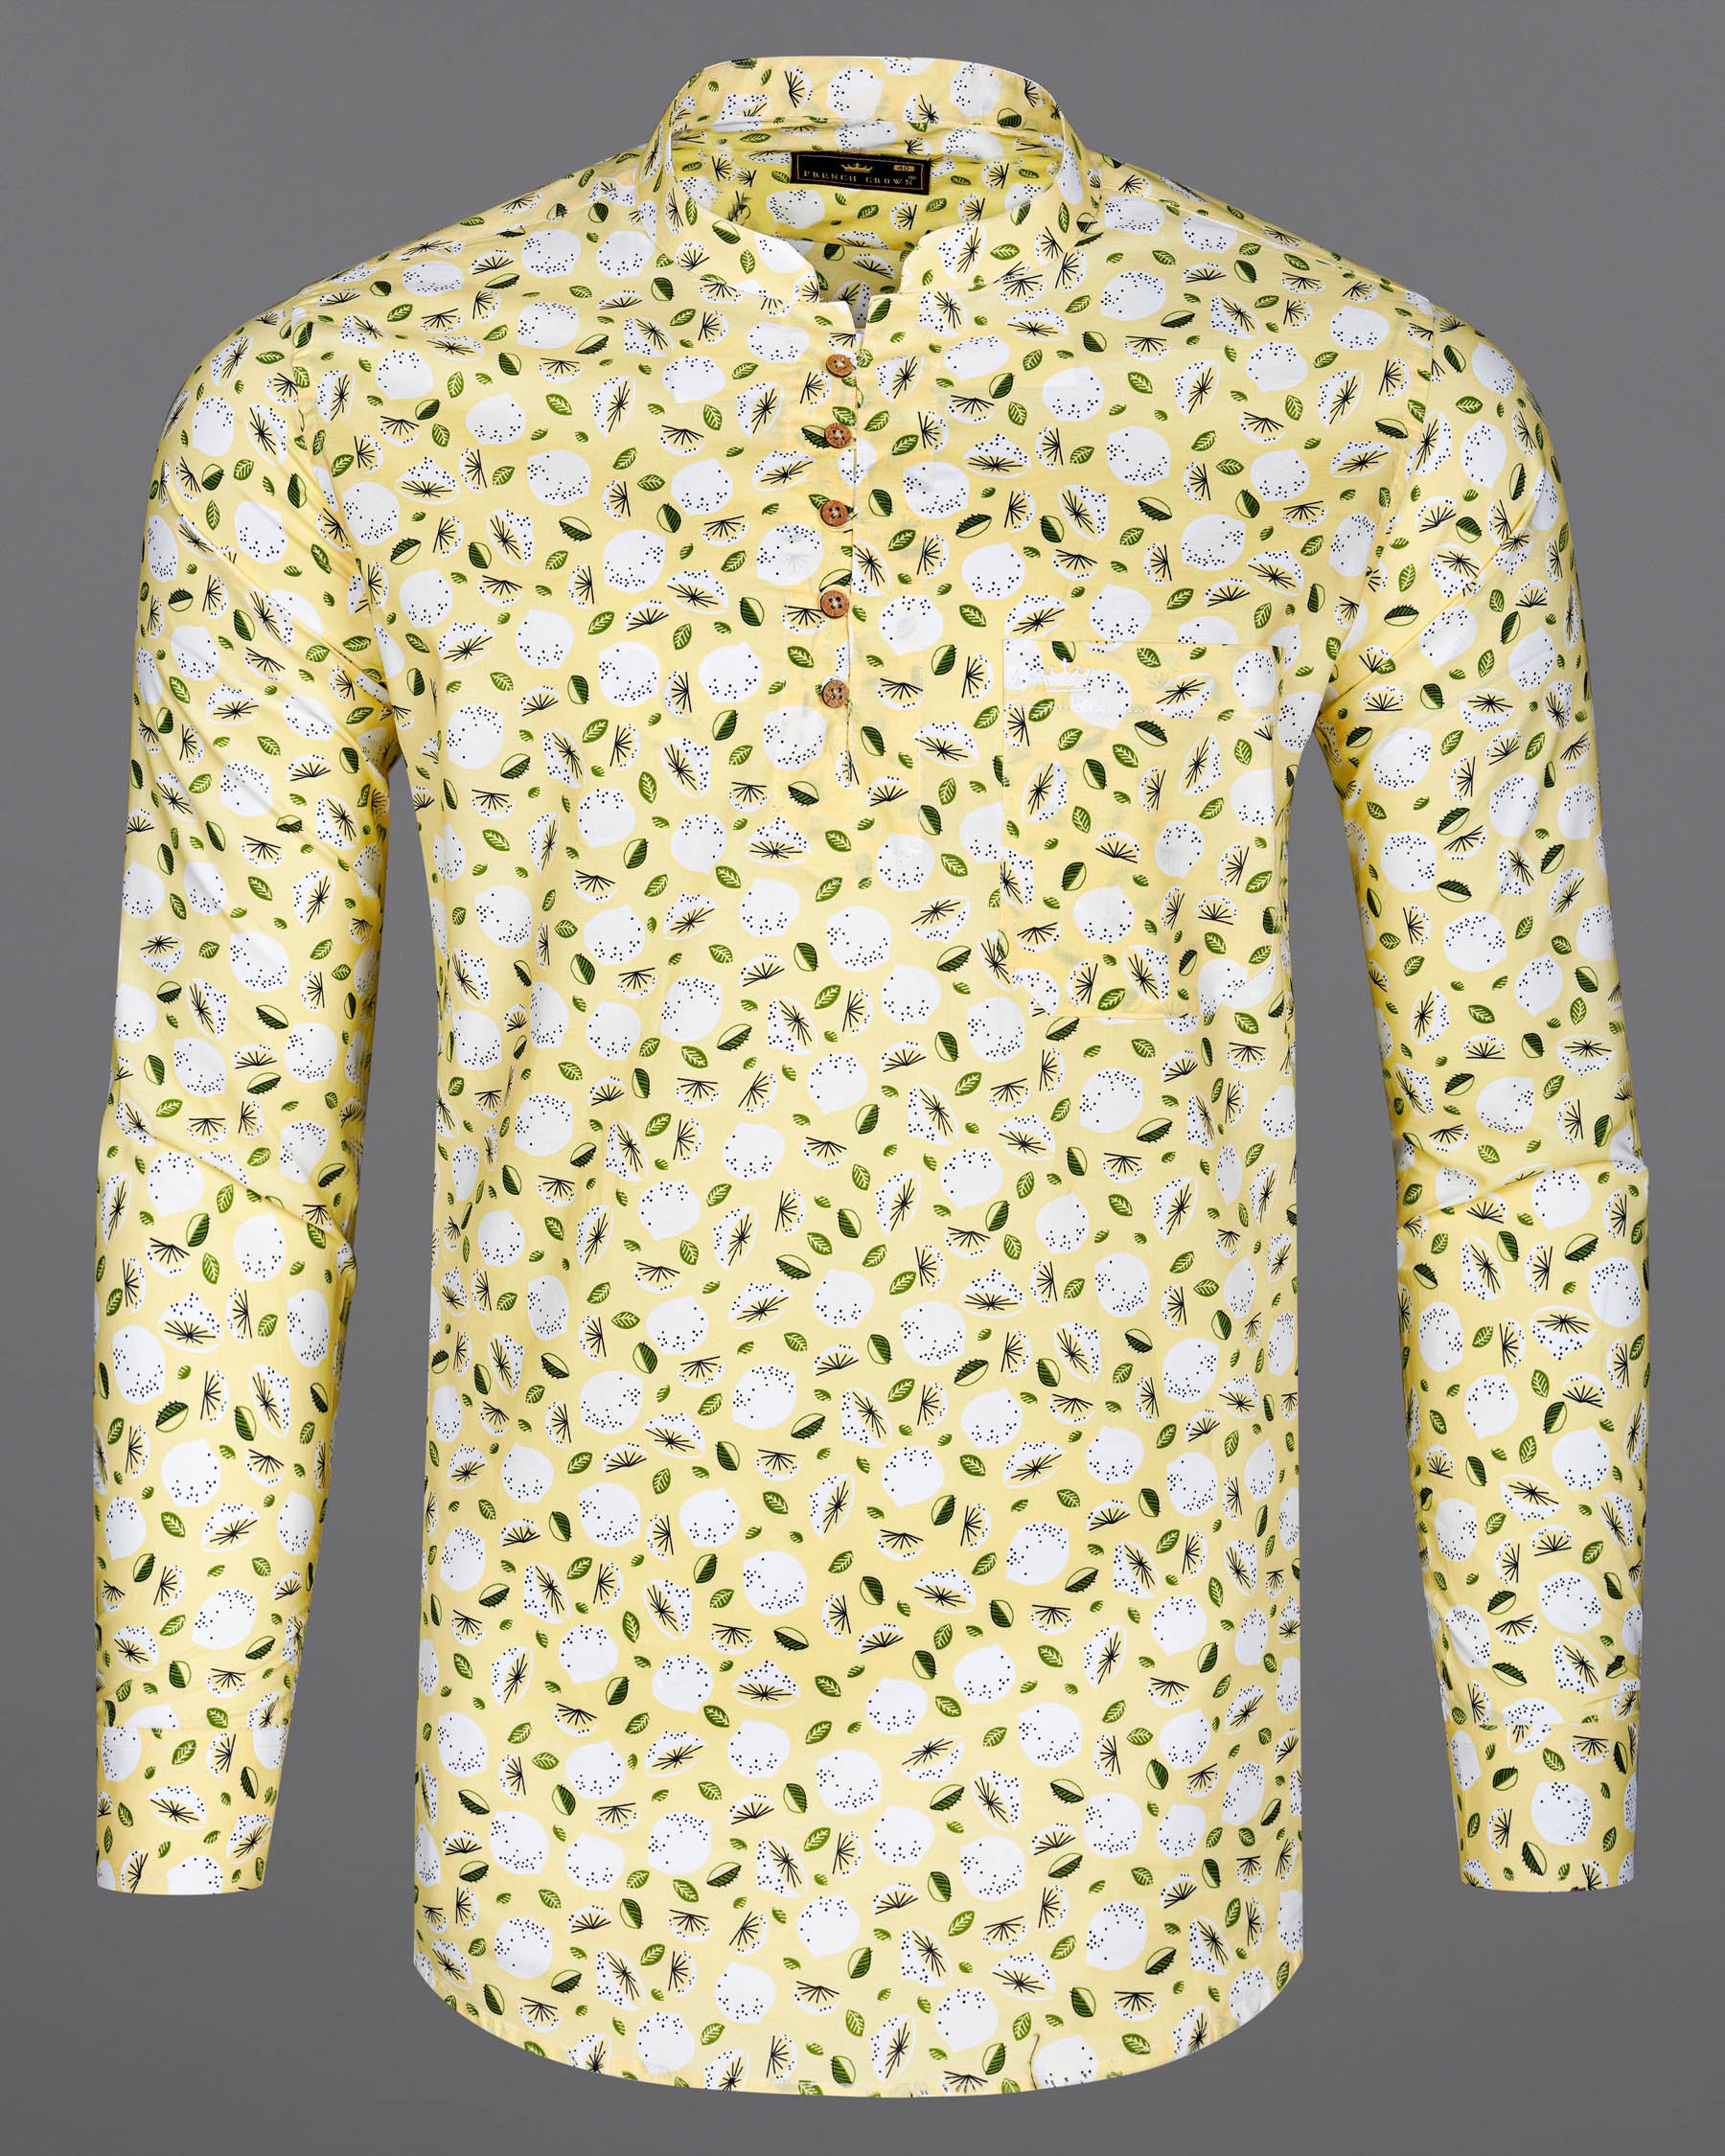 Pale Goldenrod Yellow Floral Printed Premium Cotton Kurta Shirt 7979-KS-38, 7979-KS-H-38, 7979-KS-39, 7979-KS-H-39, 7979-KS-40, 7979-KS-H-40, 7979-KS-42, 7979-KS-H-42, 7979-KS-44, 7979-KS-H-44, 7979-KS-46, 7979-KS-H-46, 7979-KS-48, 7979-KS-H-48, 7979-KS-50, 7979-KS-H-50, 7979-KS-52, 7979-KS-H-52